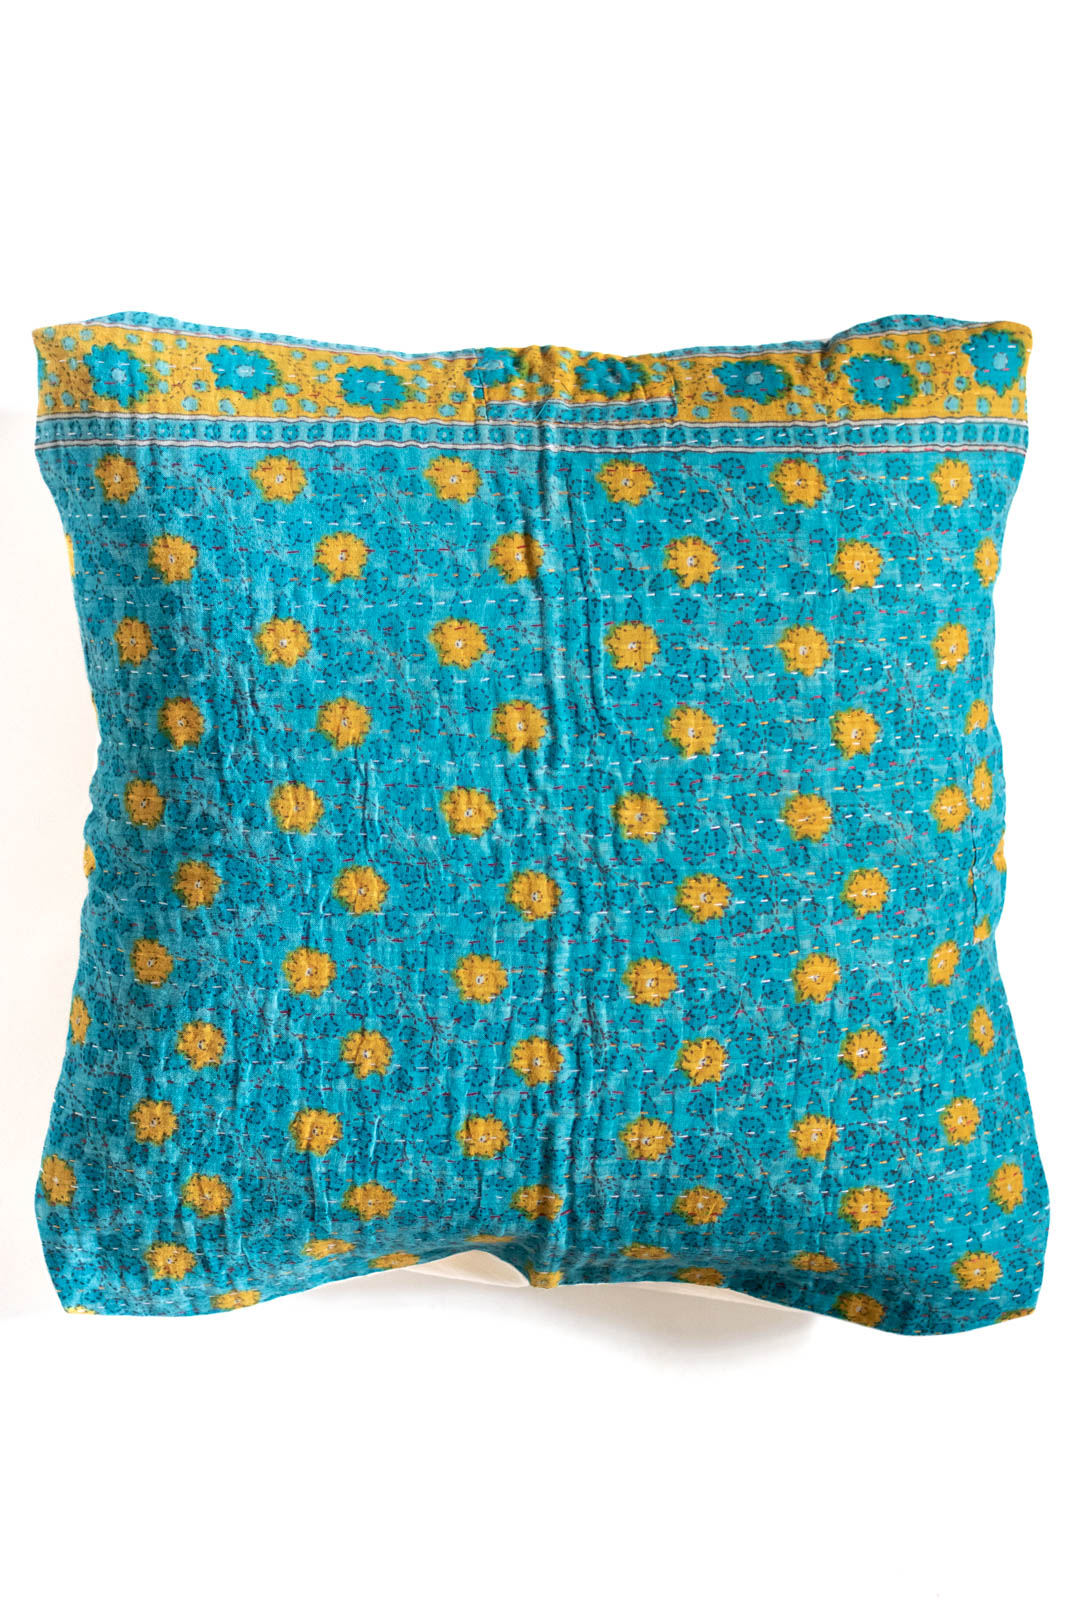 Worth no. 8 Kantha Pillow Cover